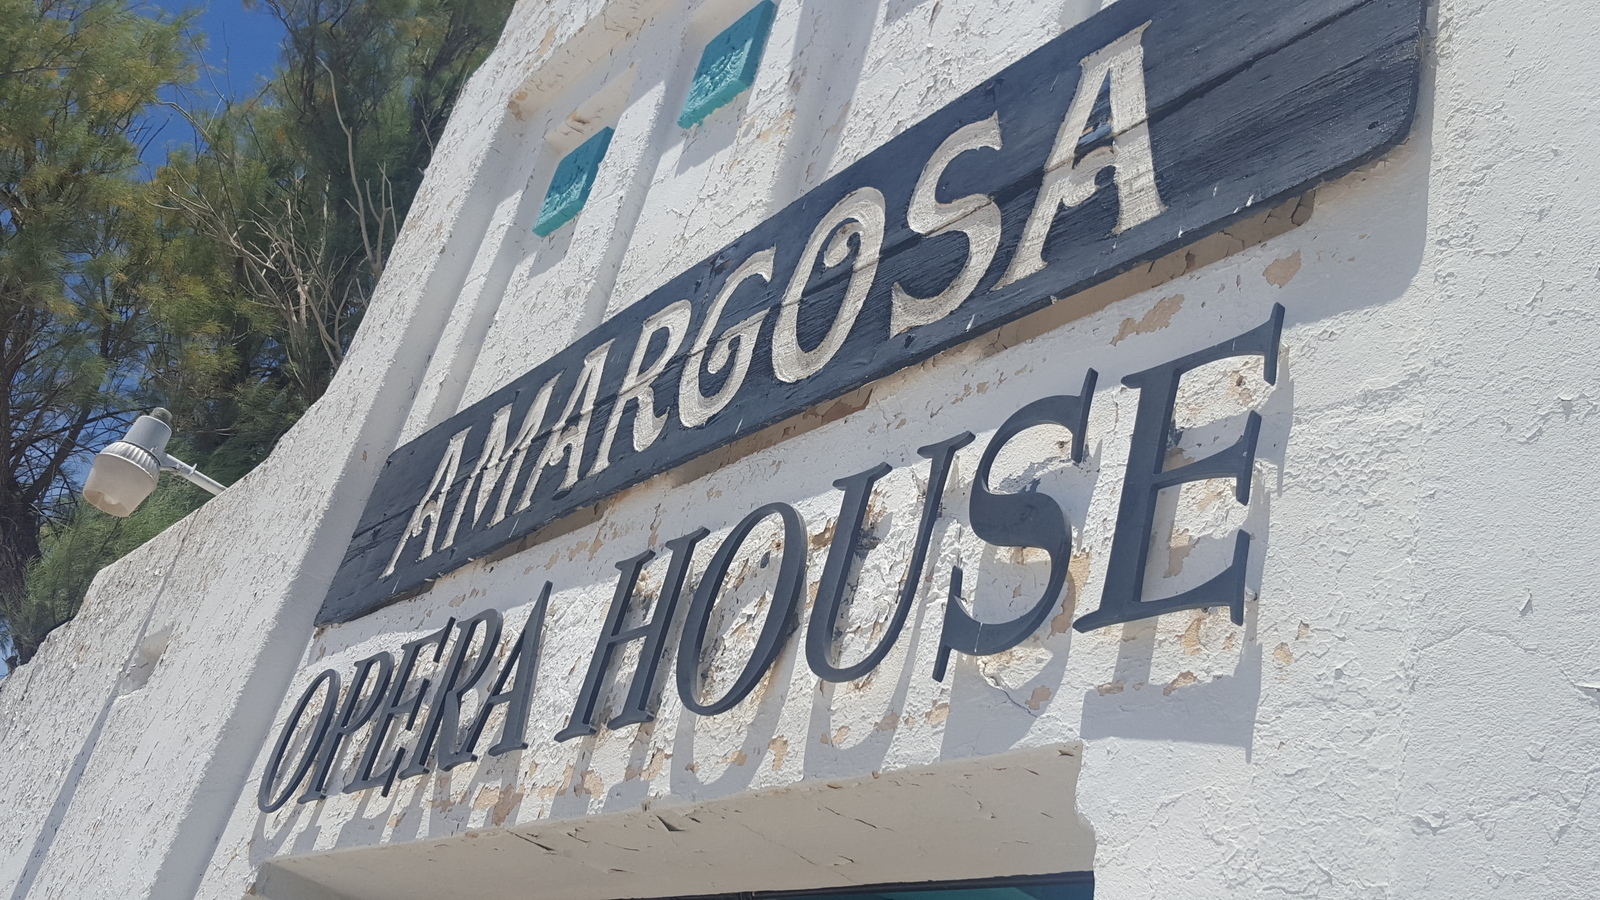 reviews of amargosa opera house and hotel